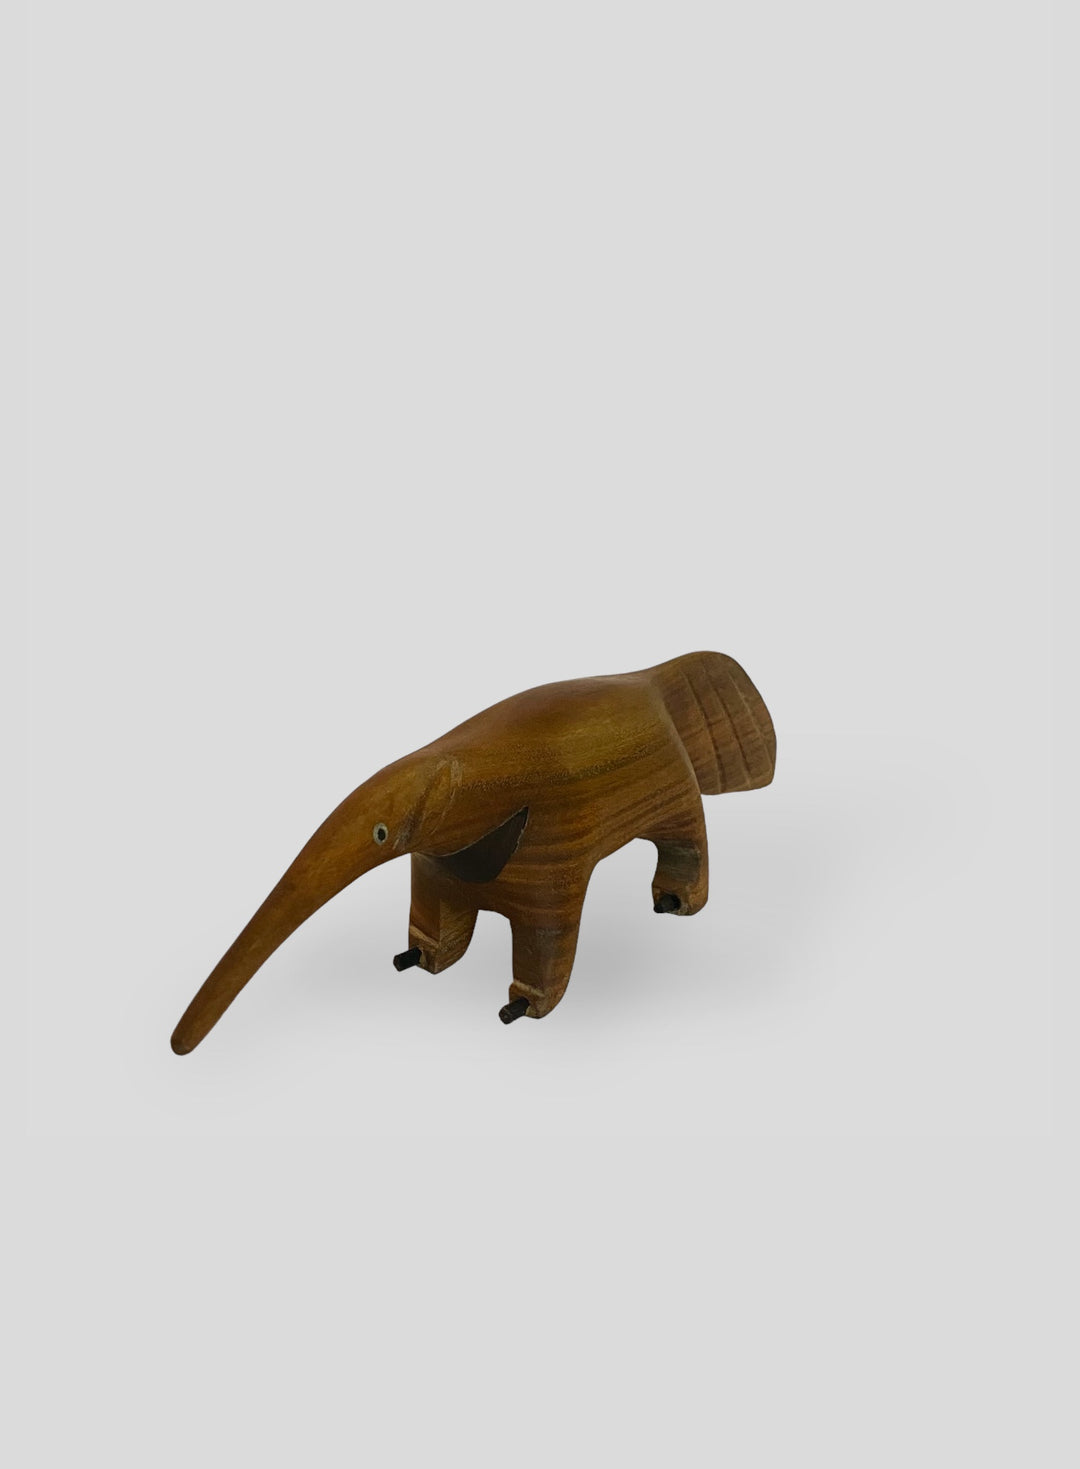 The Anteater Carving (large)